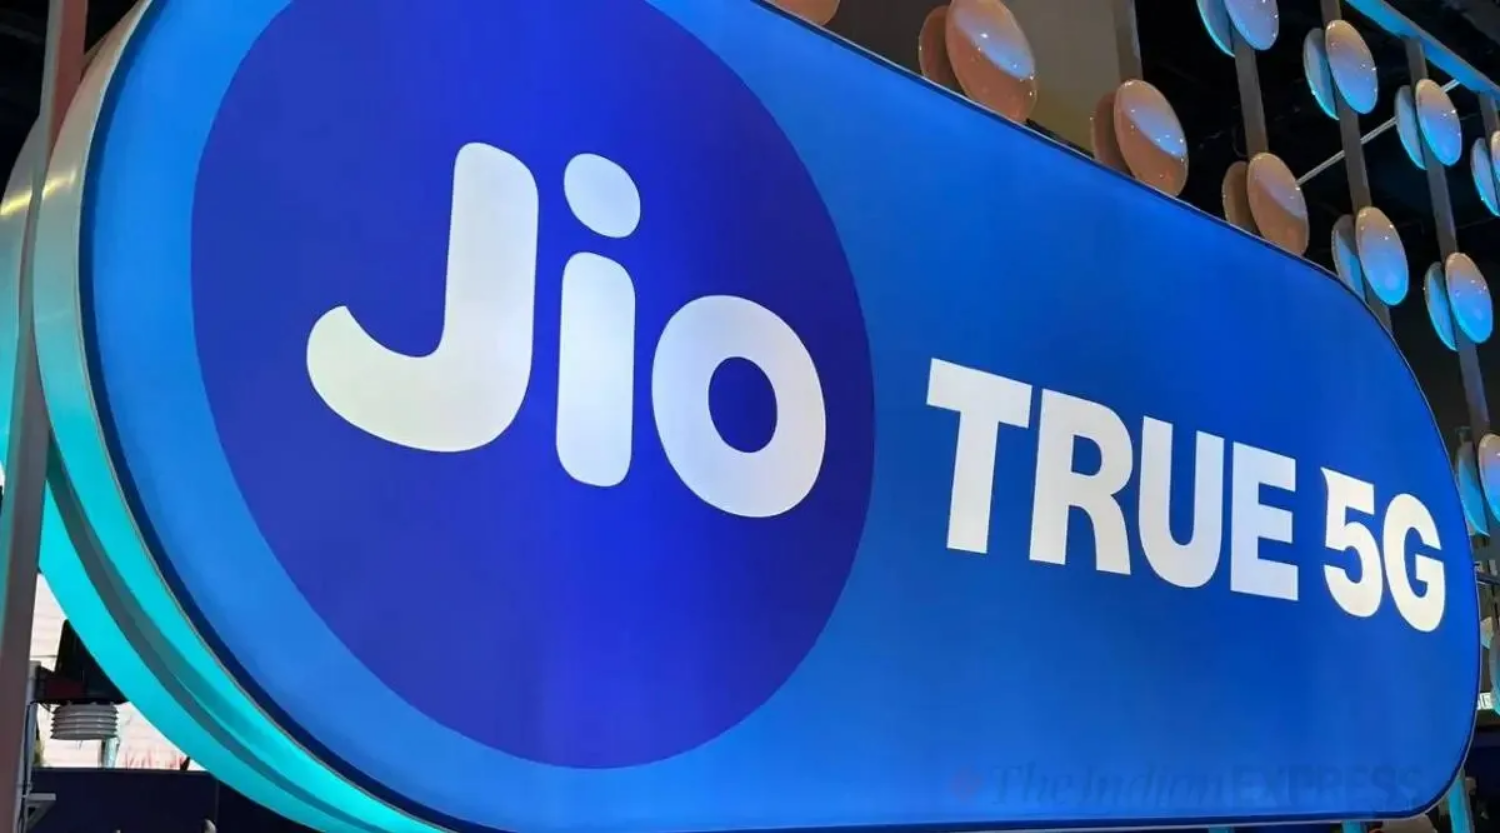 Jio True 5G coverage now available across Delhi-NCR regions